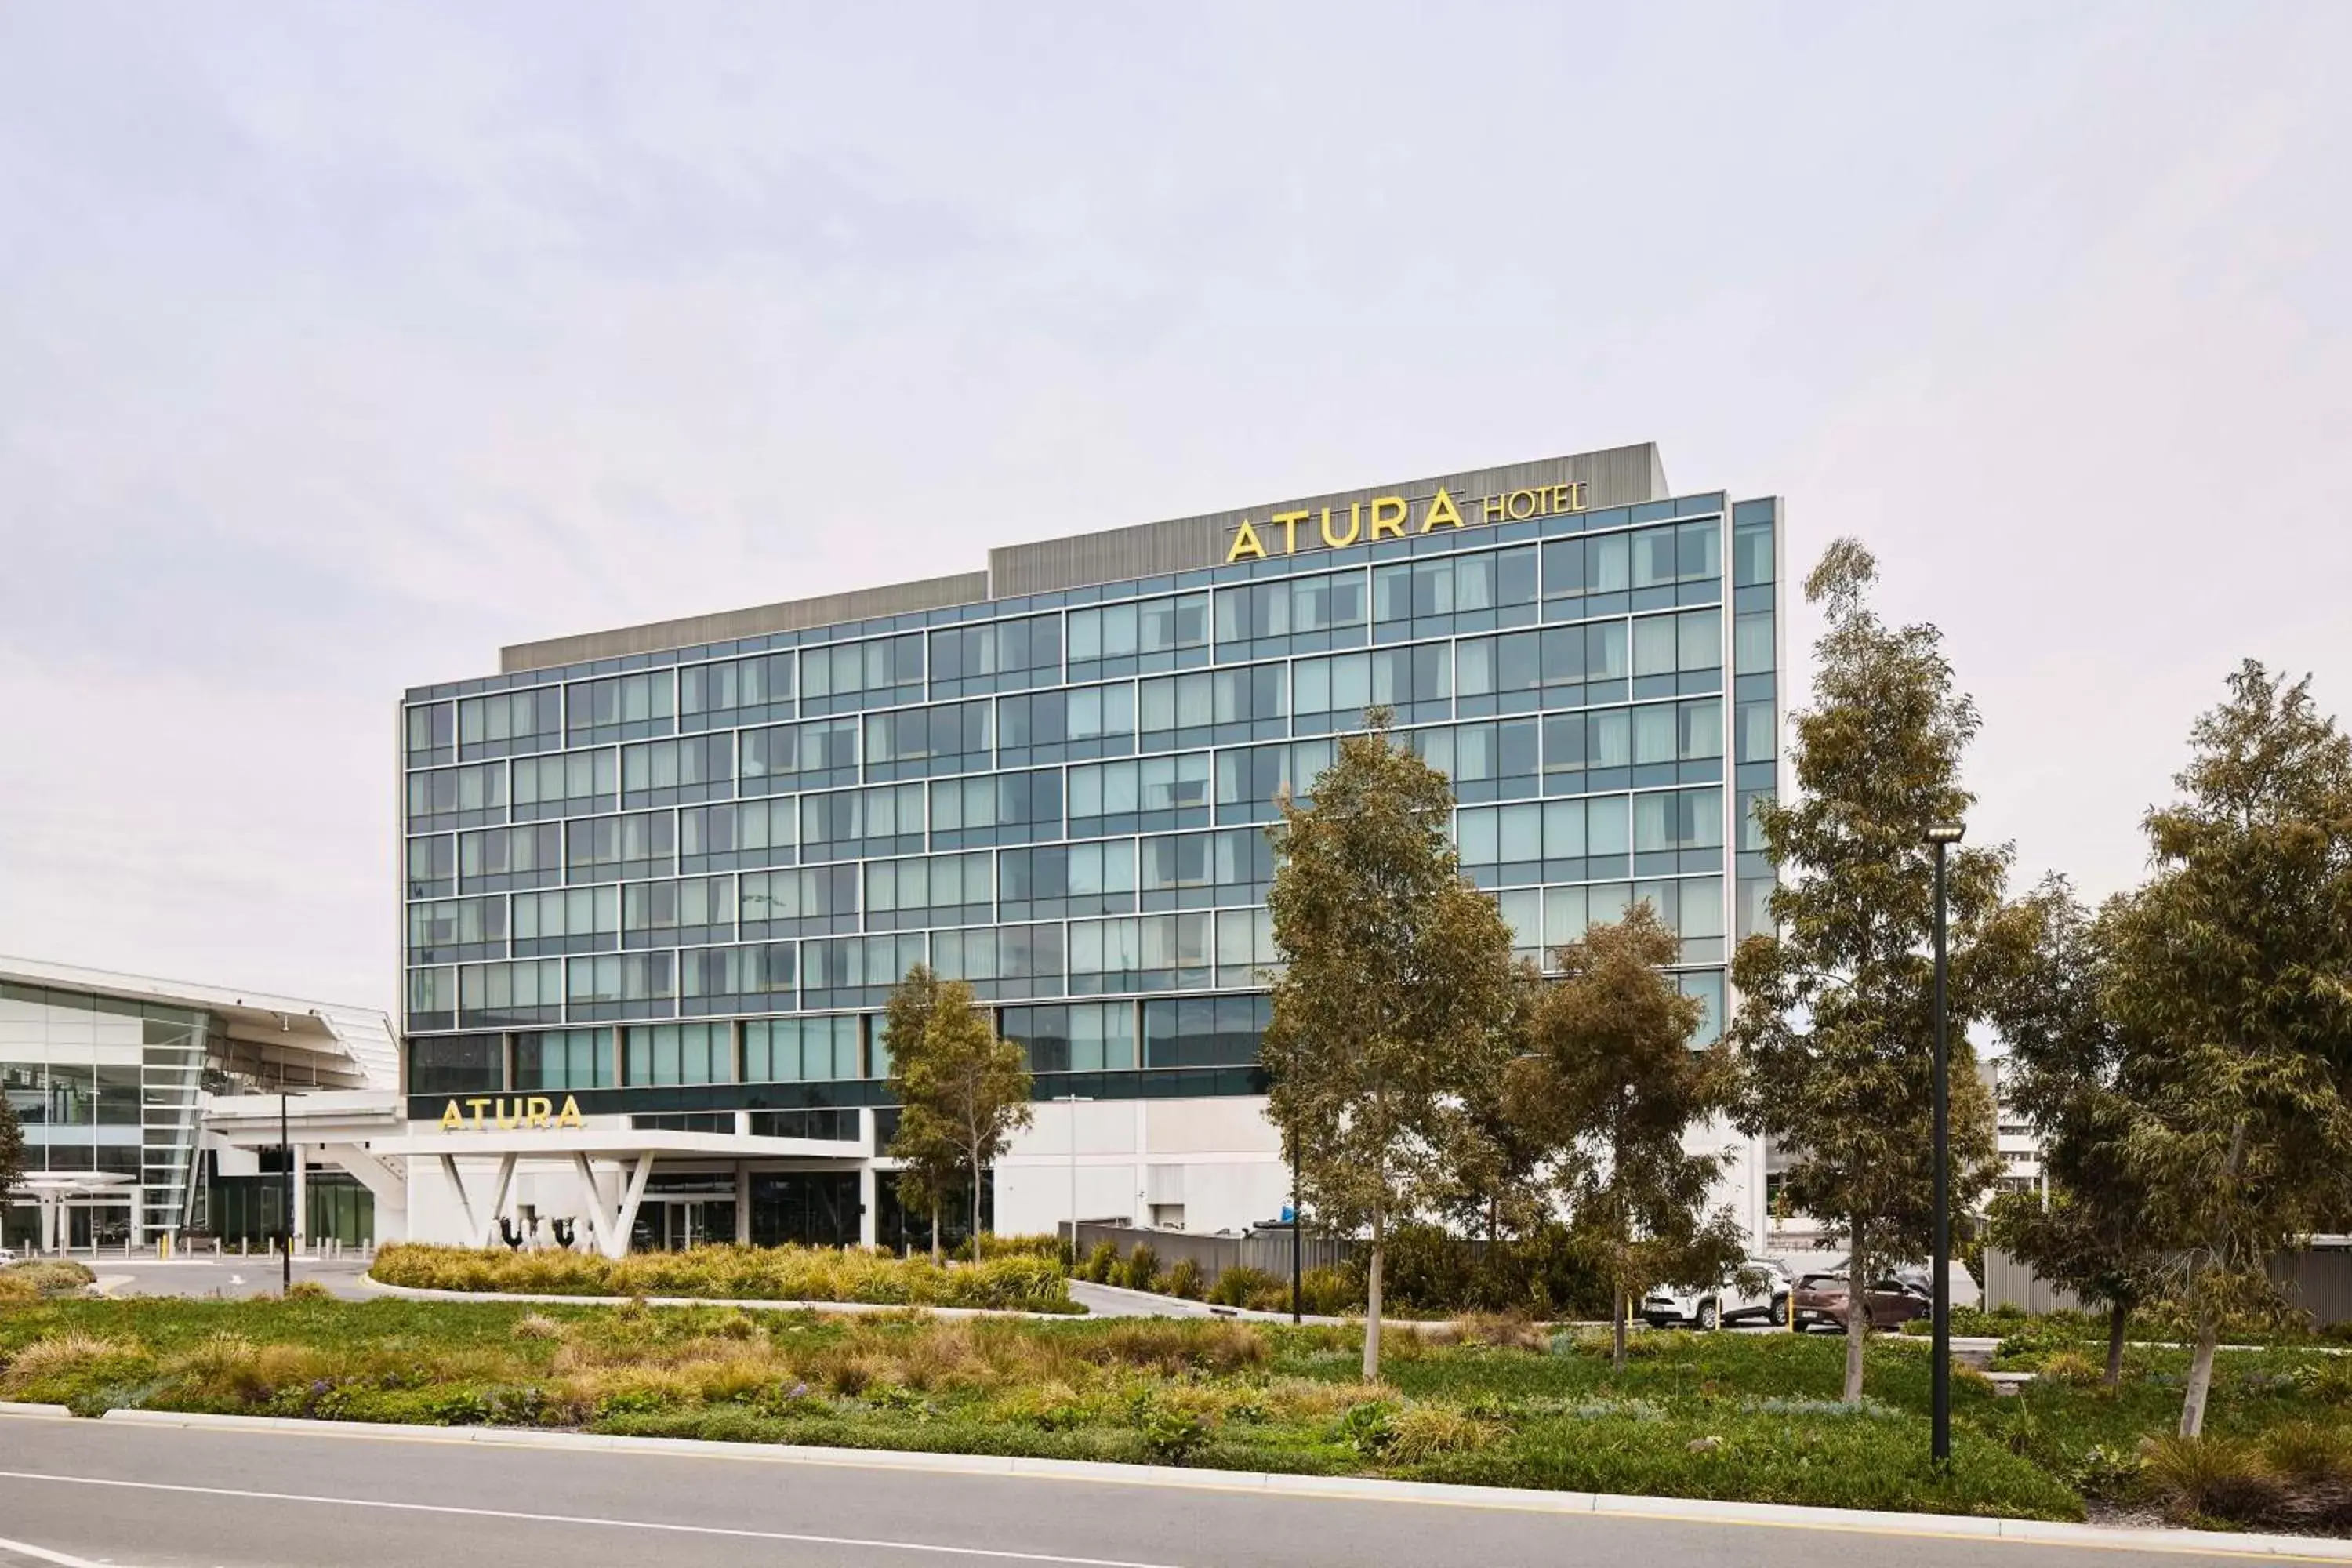 Property Building in Atura Adelaide Airport